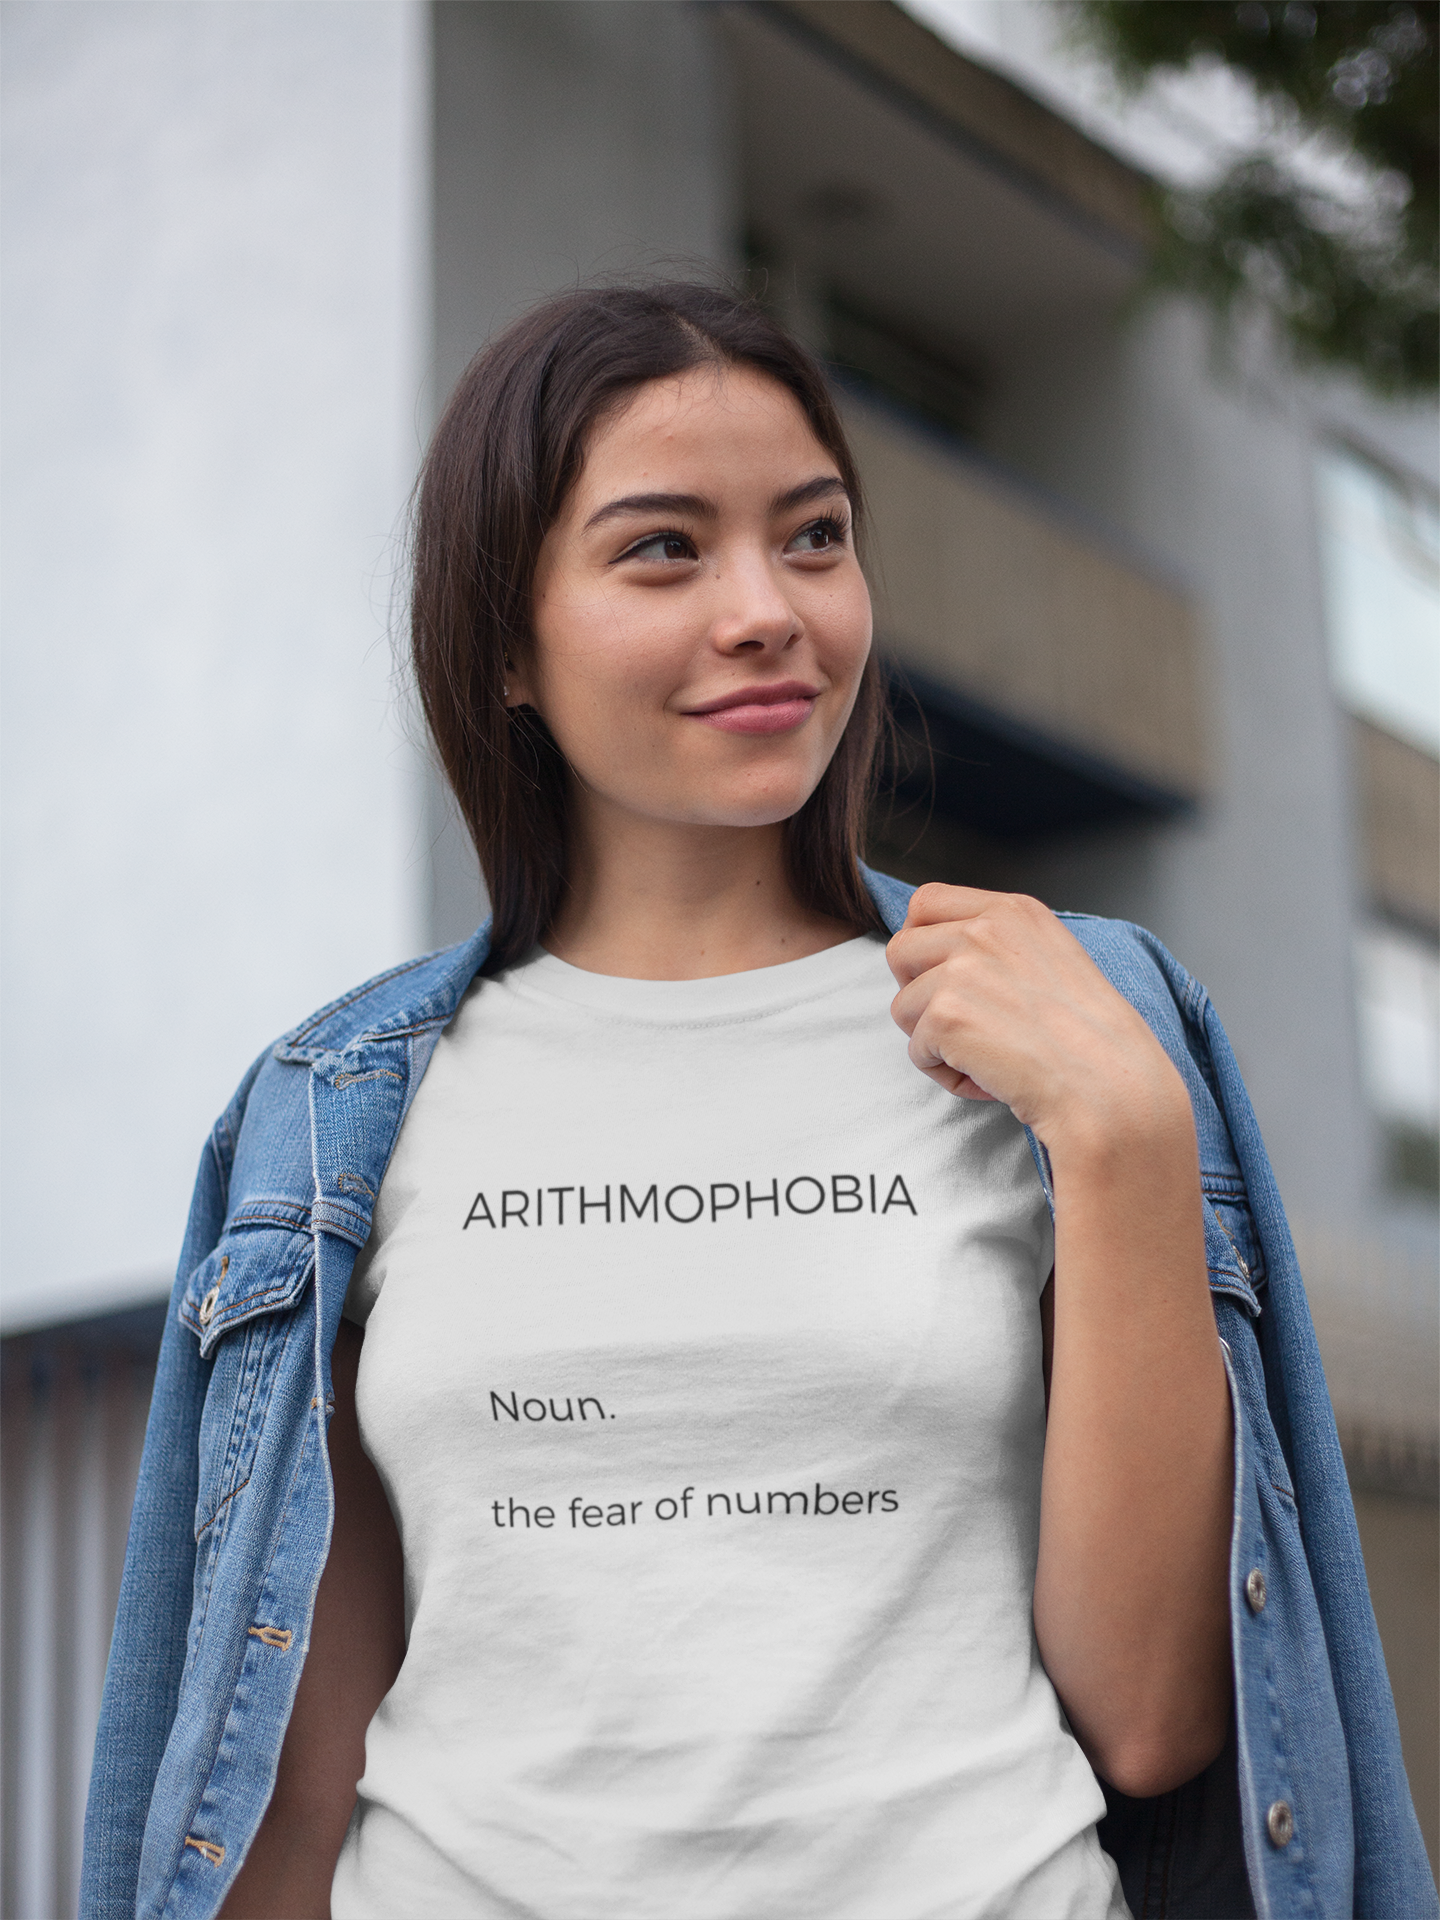 Arithmophobia The Fear of Numbers Unisex Jersey Short Sleeve Tee